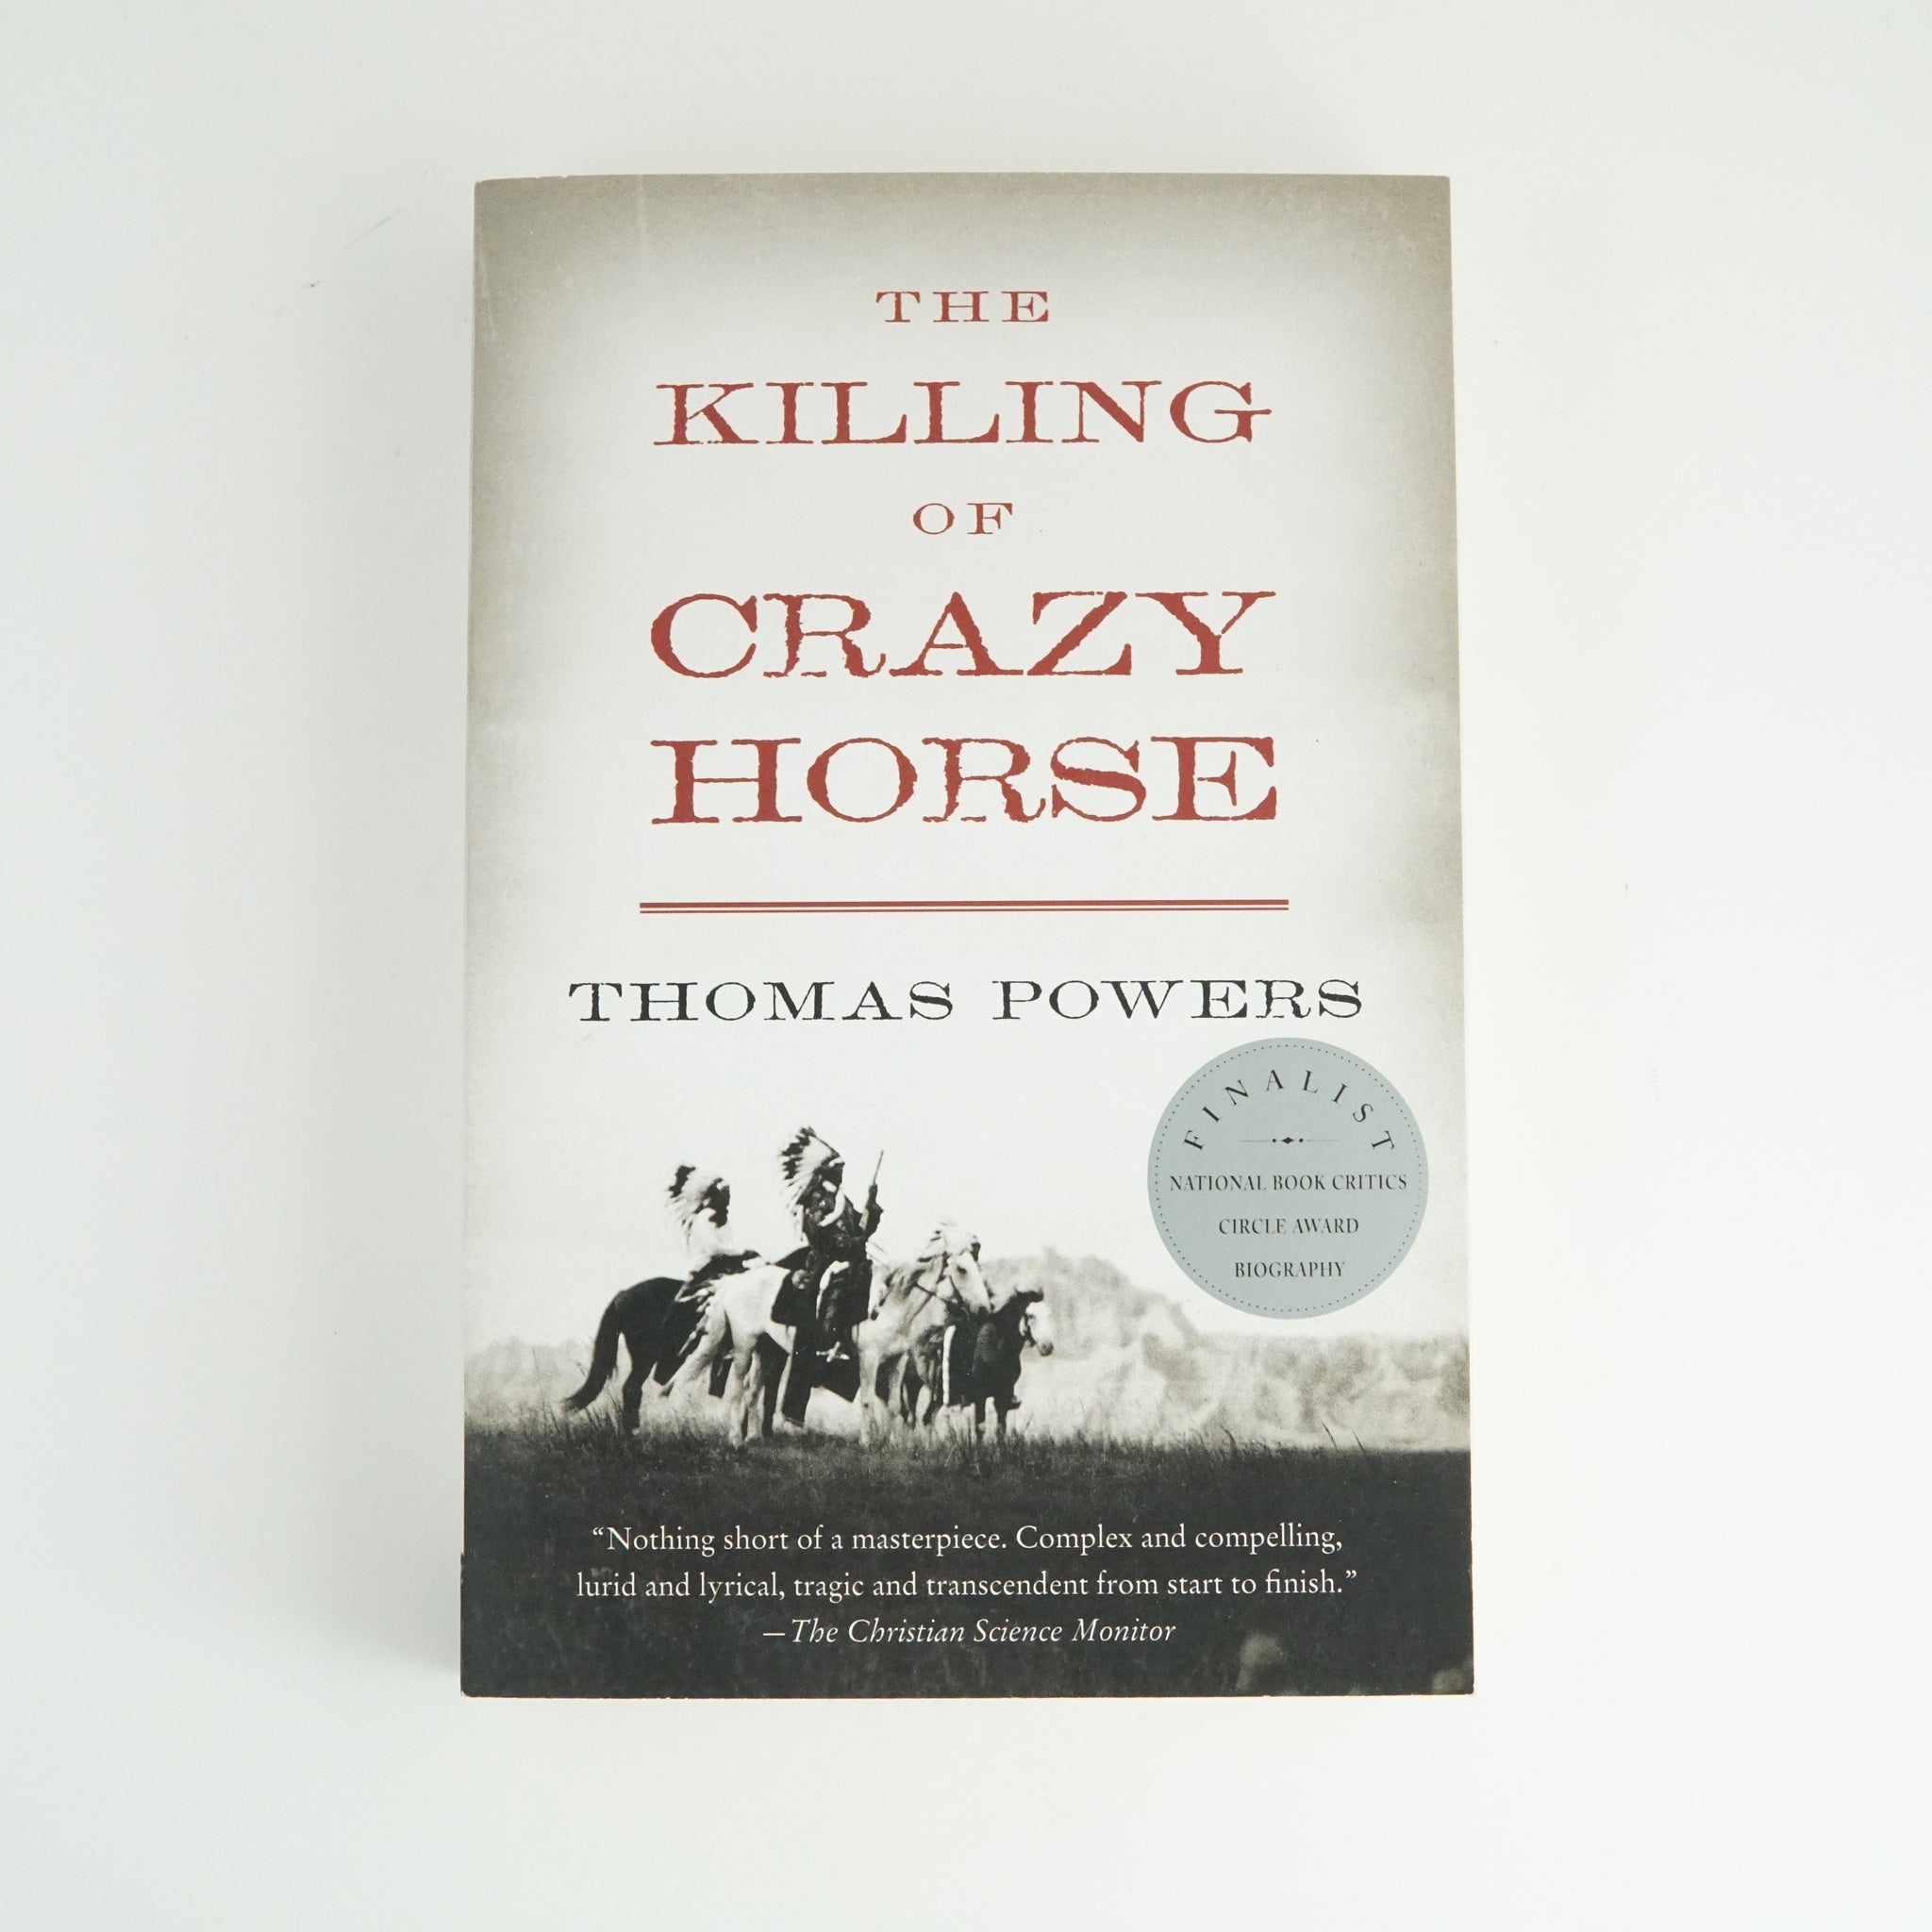 BK 12 THE KILLING OF CRAZY HORSE BY THOMAS POWERS #21036612 D2 SEPT23